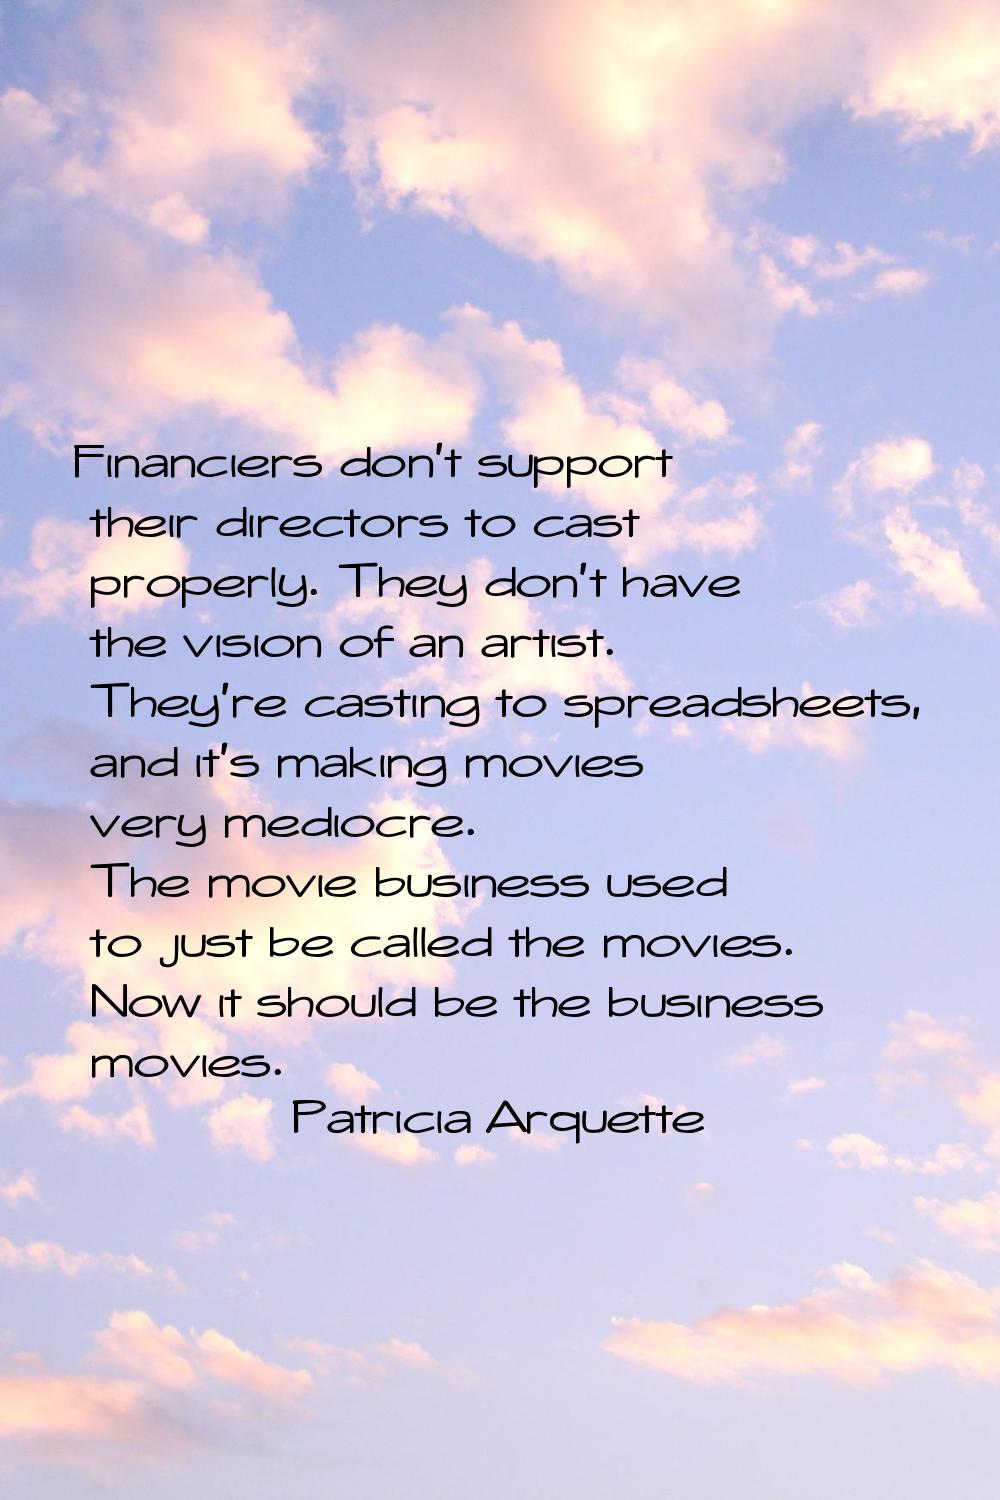 Financiers don't support their directors to cast properly. They don't have the vision of an artist.